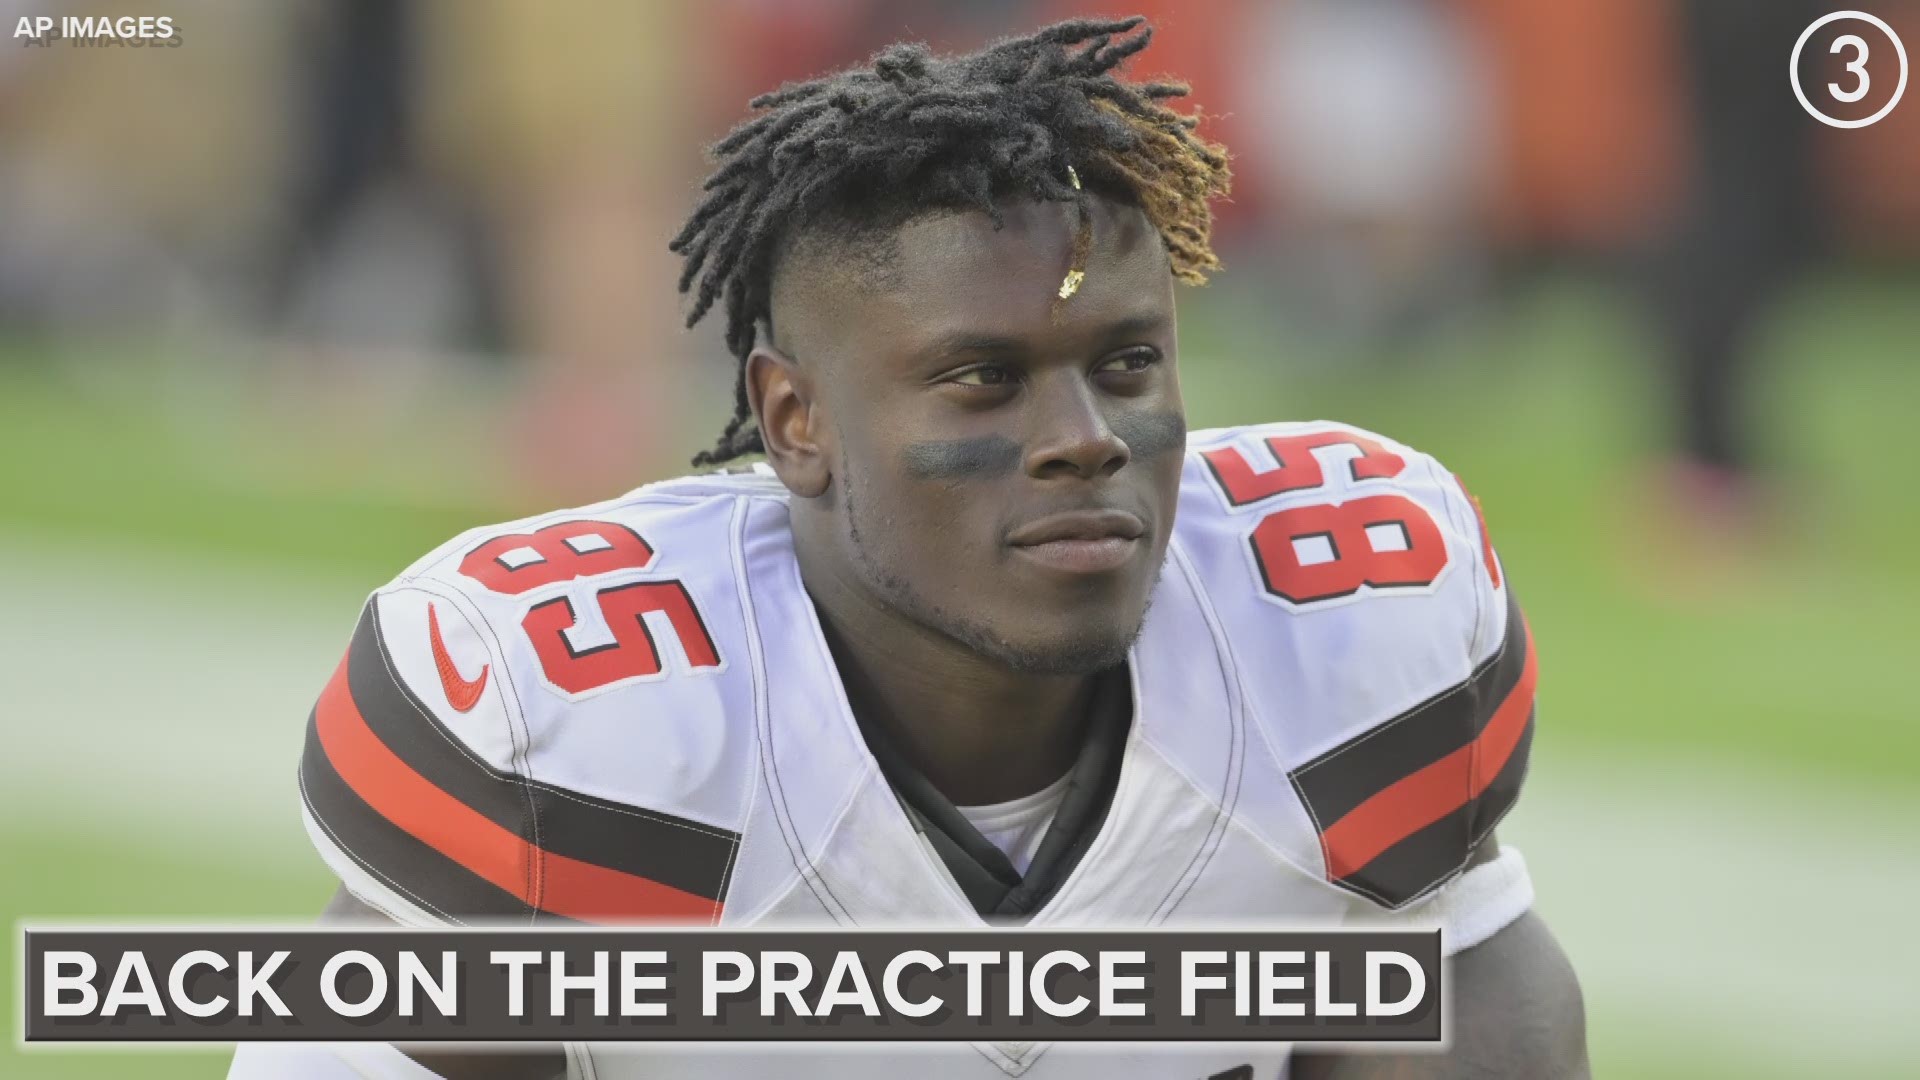 Back to work!  The Cleveland Browns announced on Wednesday that they have designated tight end David Njoku for a return from injured reserve.